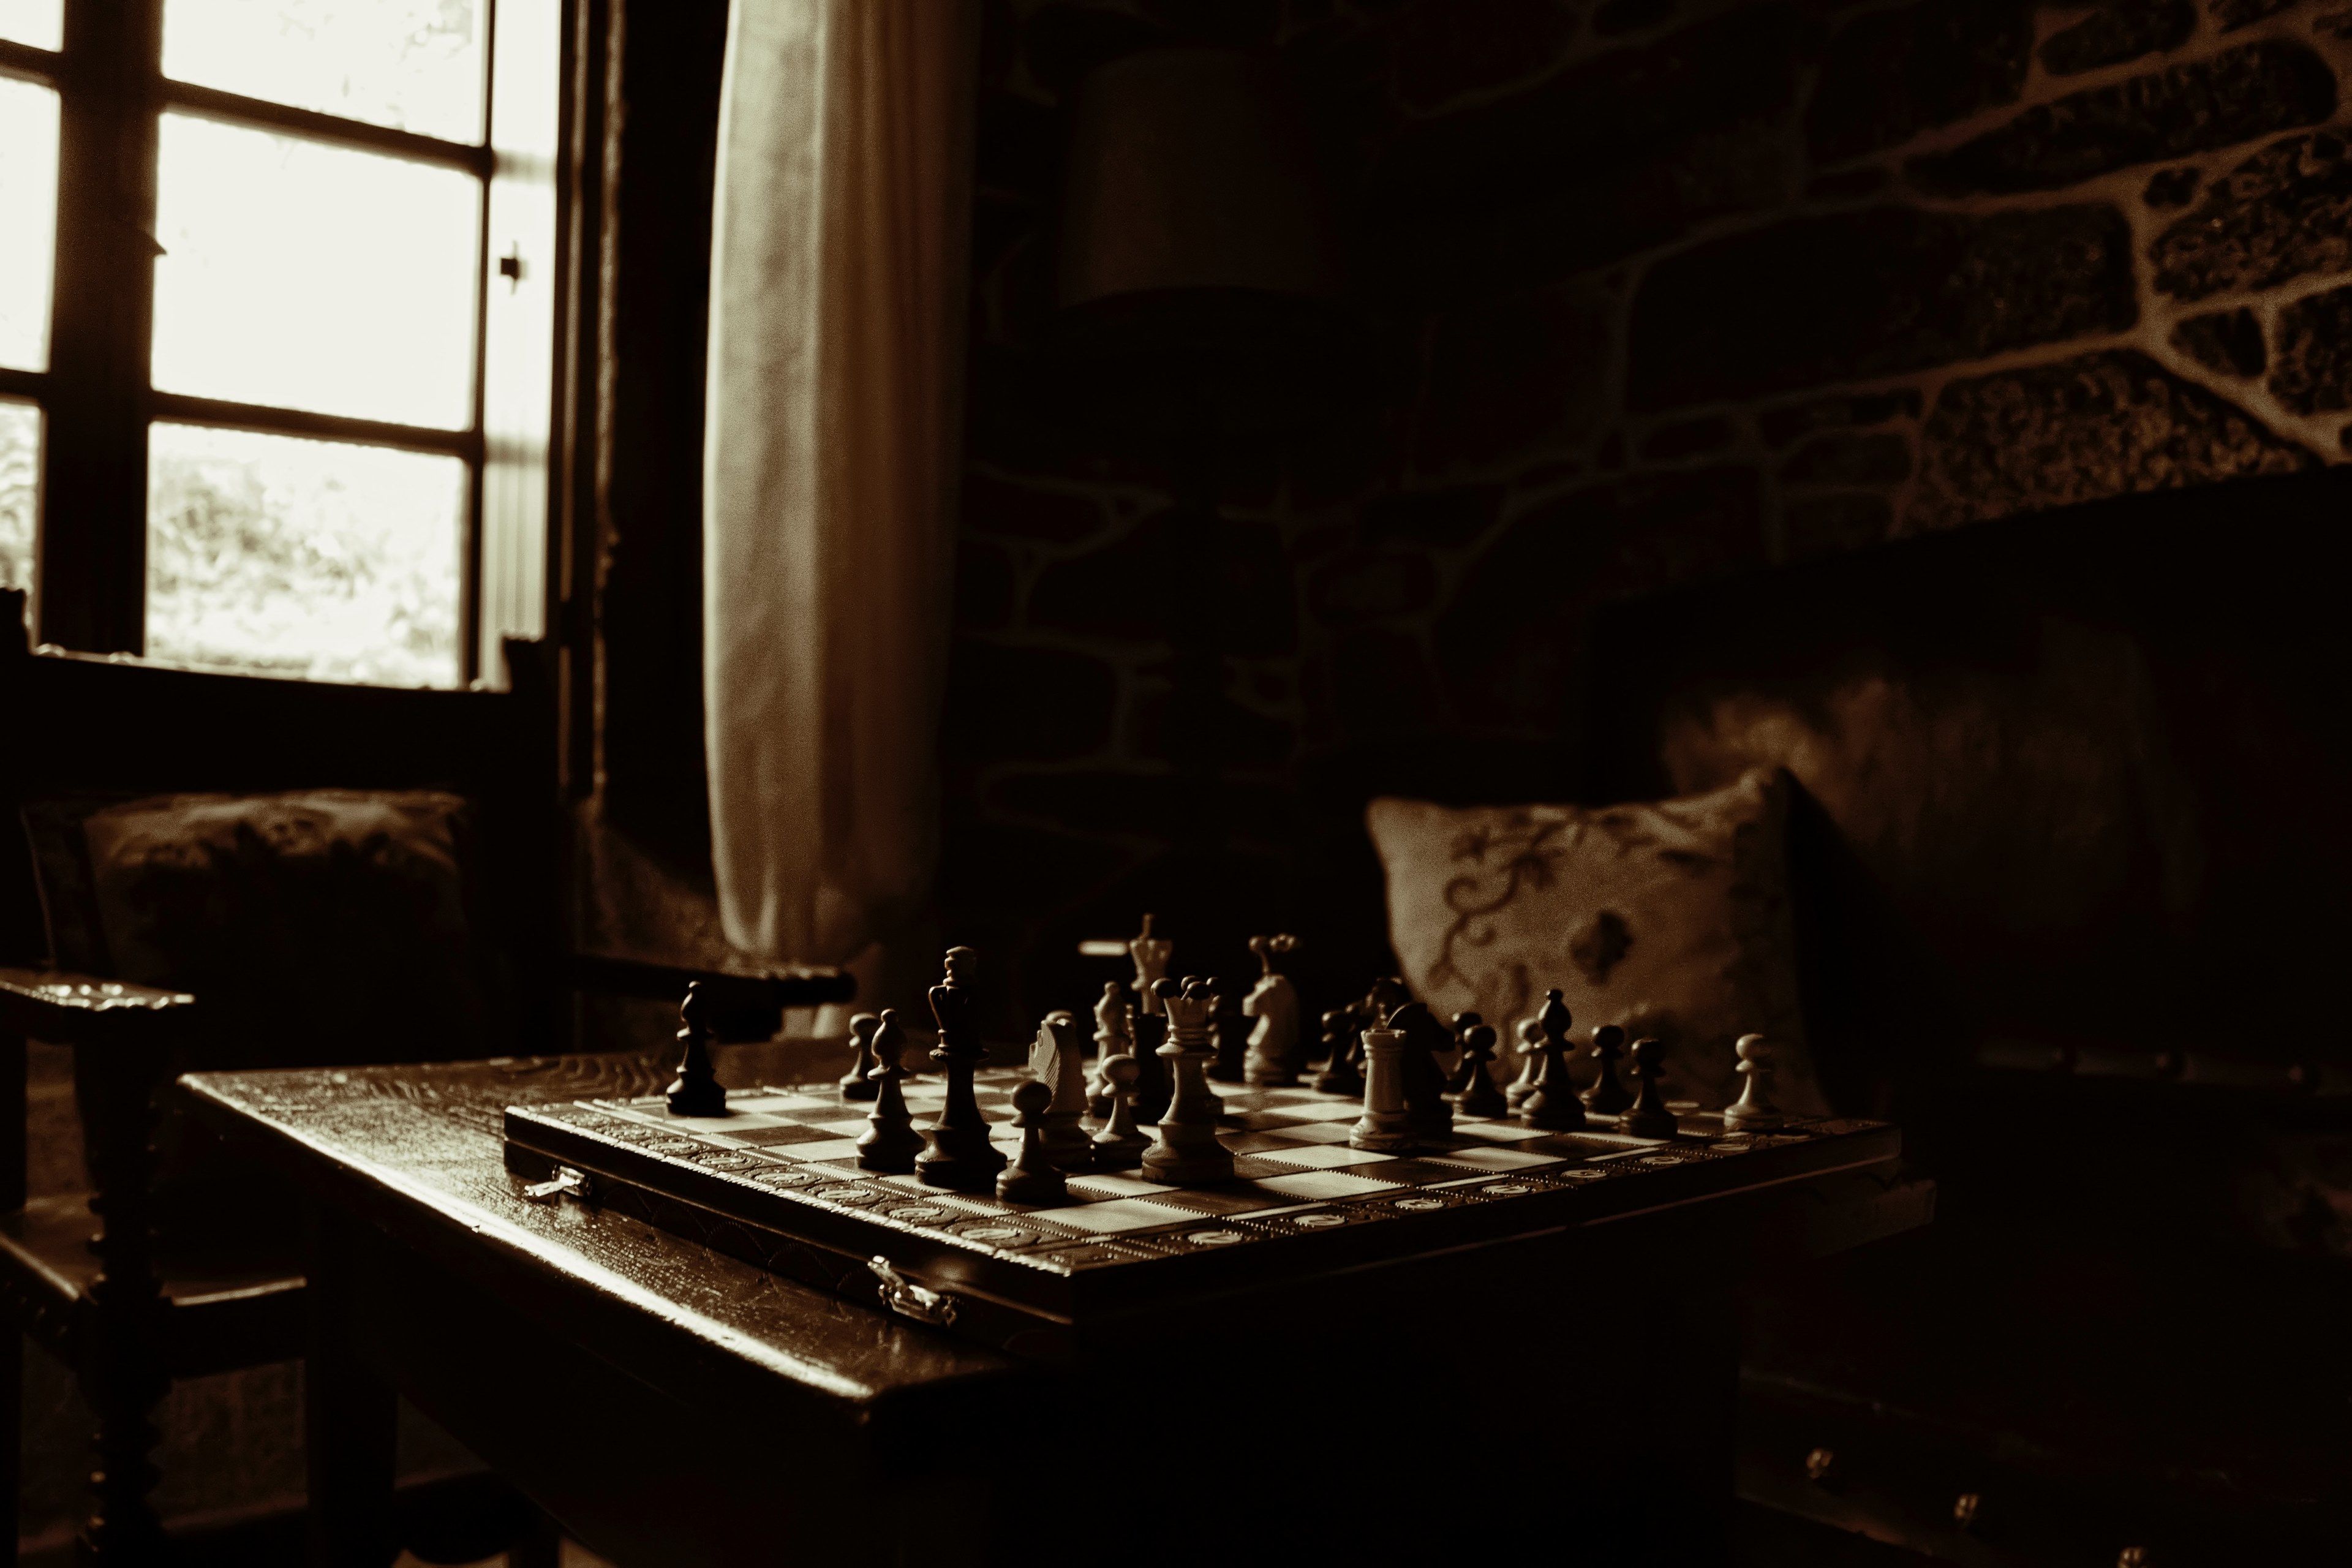 Wallpaper / chess pieces on a board in a dark room, quiet place 4k wallpaper free download